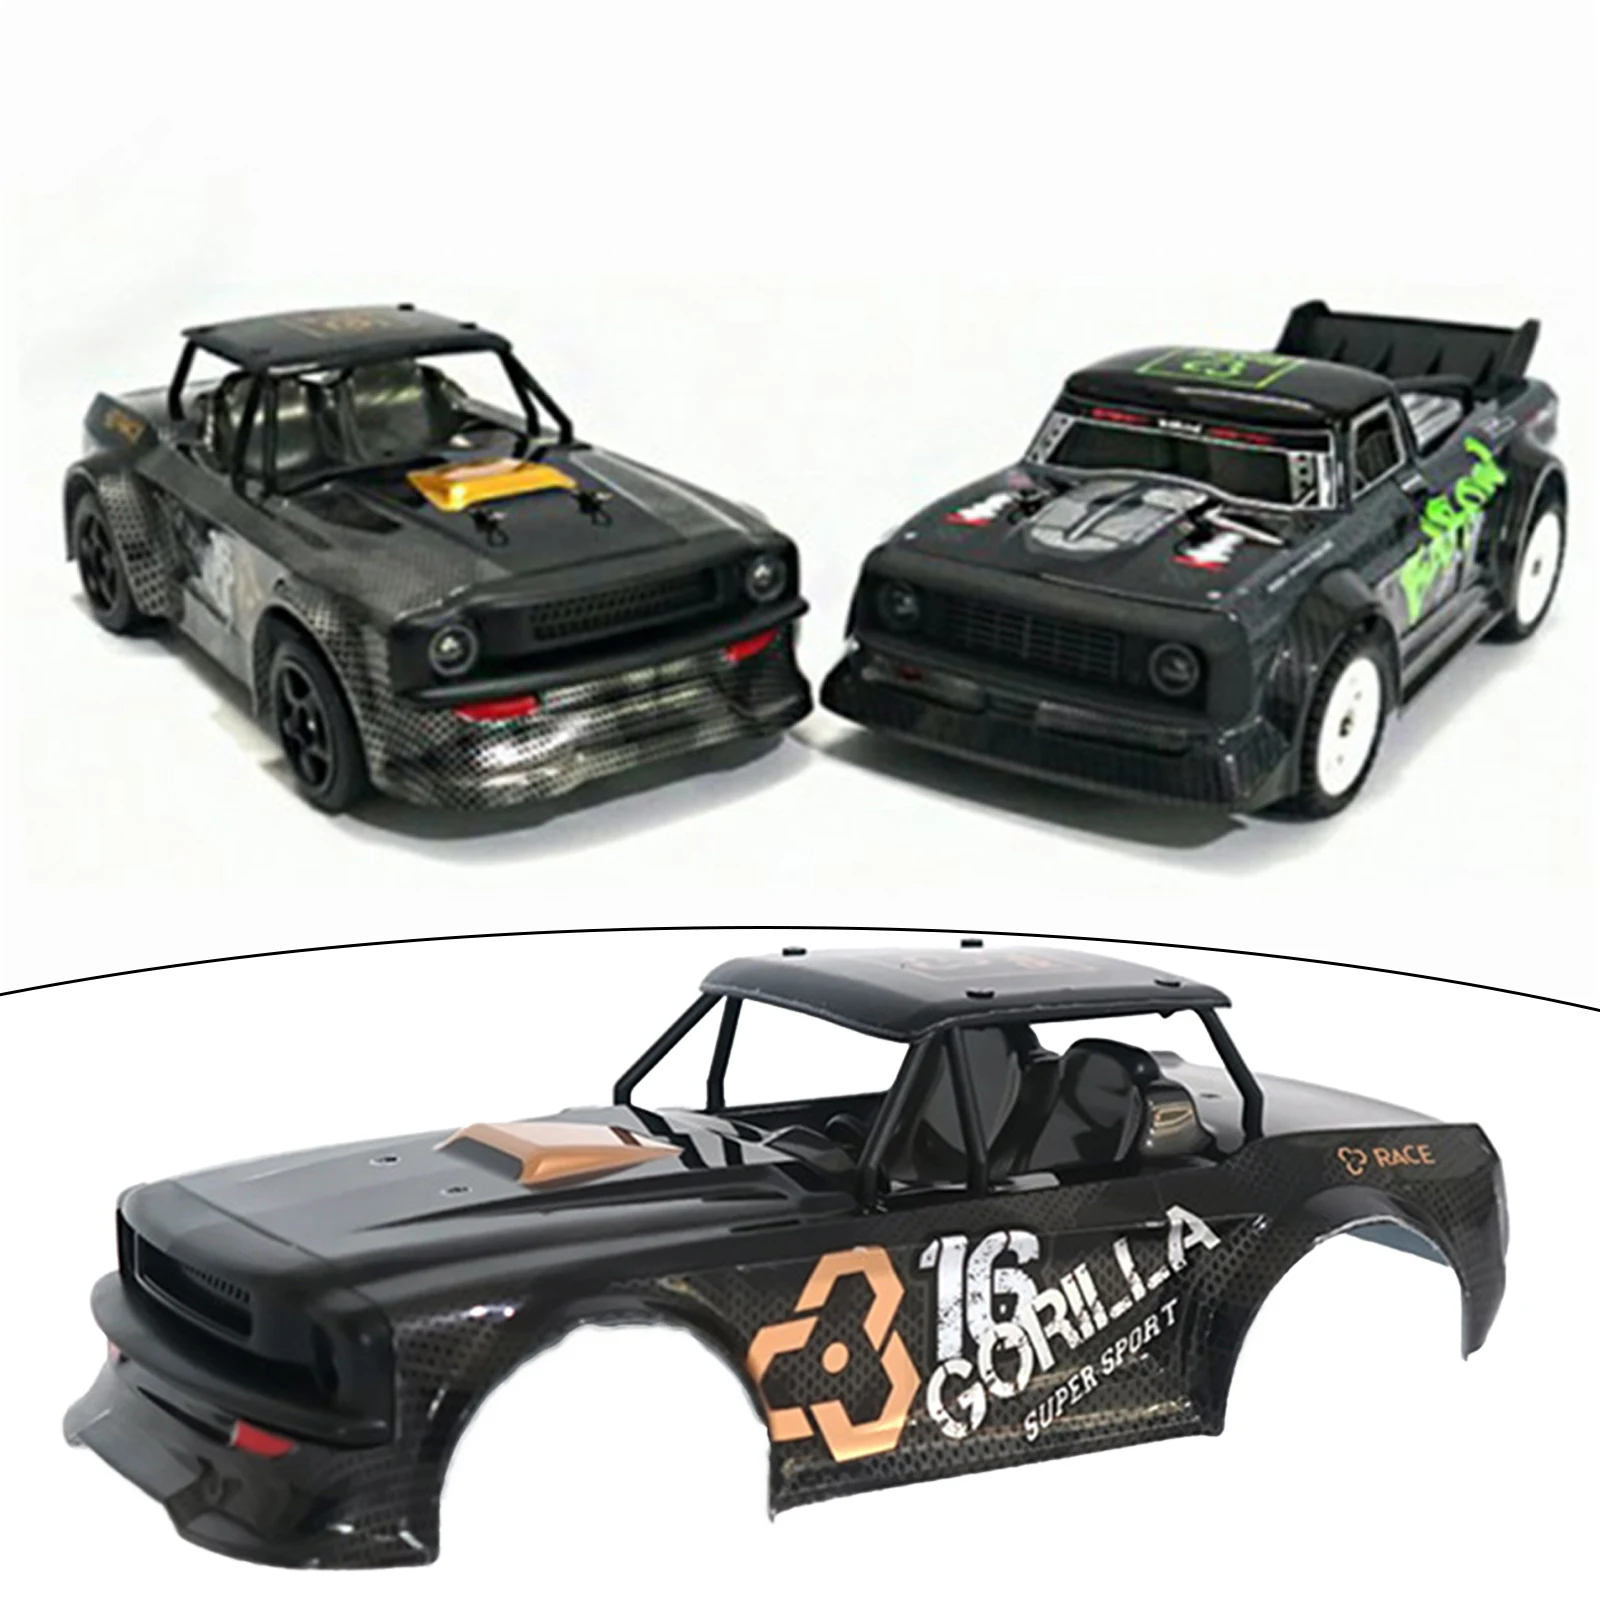 Replacement Body Shell for SG-1604 1:16 Scale RC Rally Truck Upgrade Parts